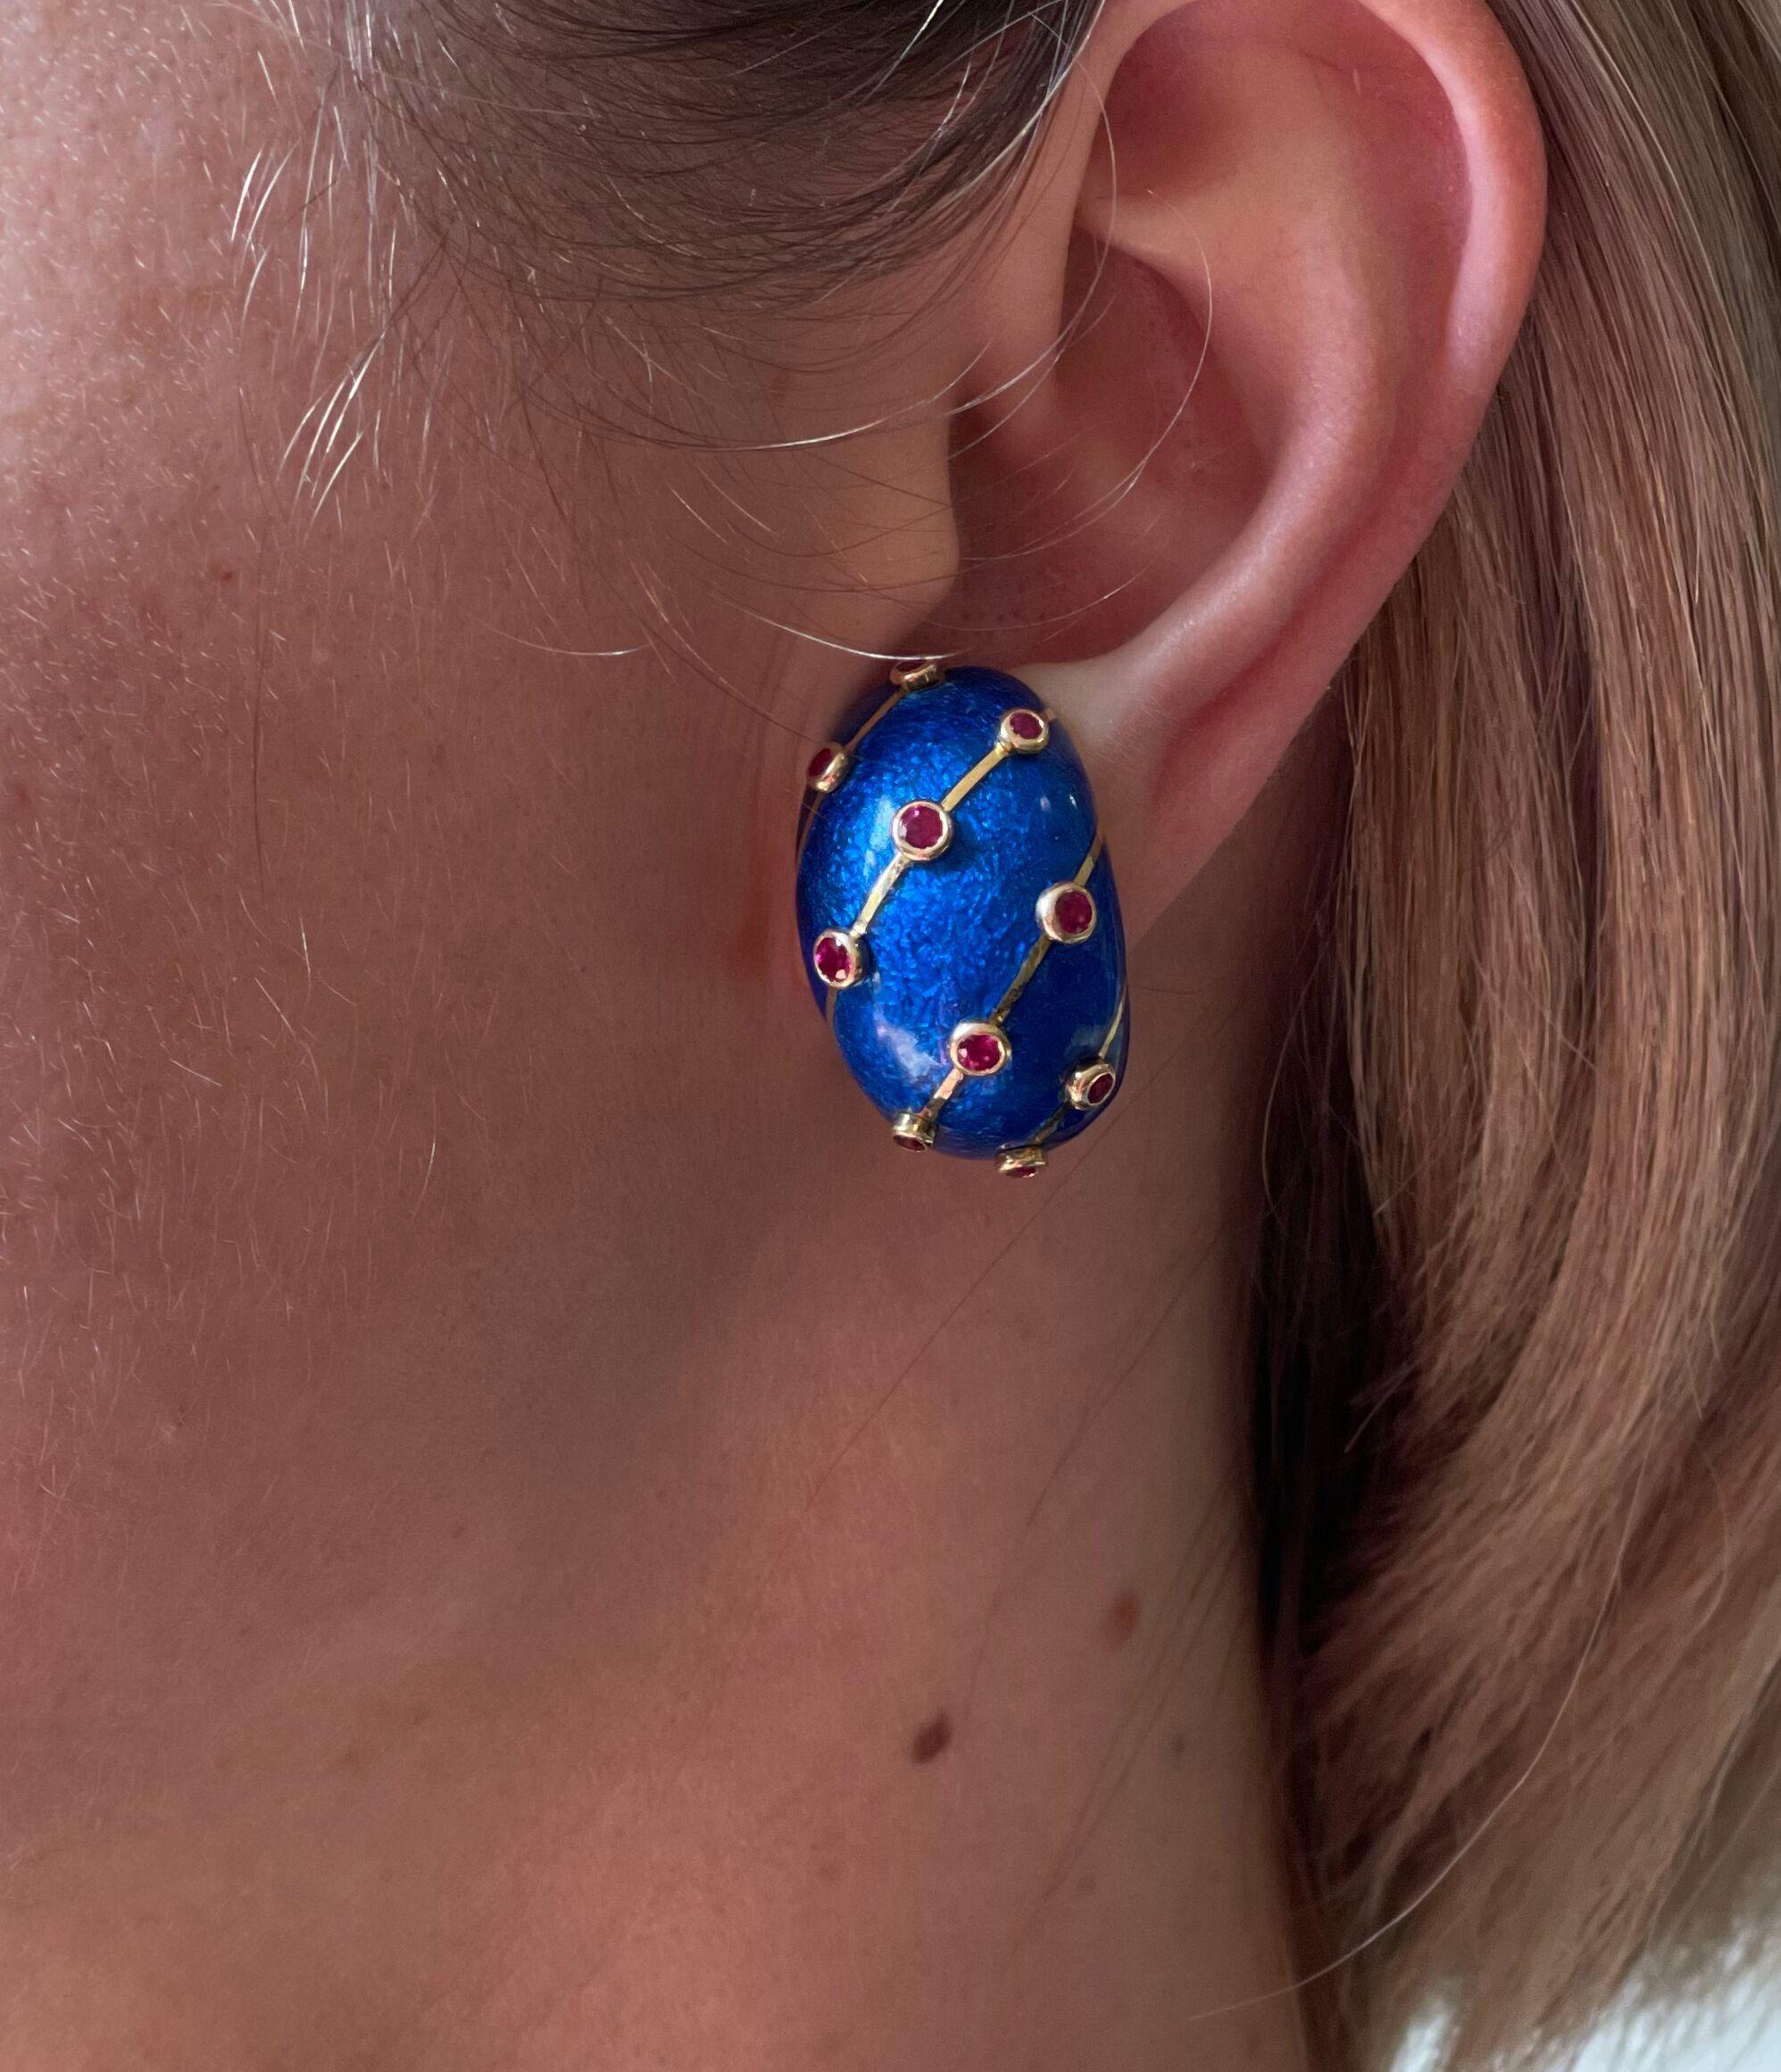 Pair of 18k gold banana earrings,  designed by Jean Schlumberger for Tiffany & Co, set with bright blue enamel and rubies. Earrings  measure 1 1/8